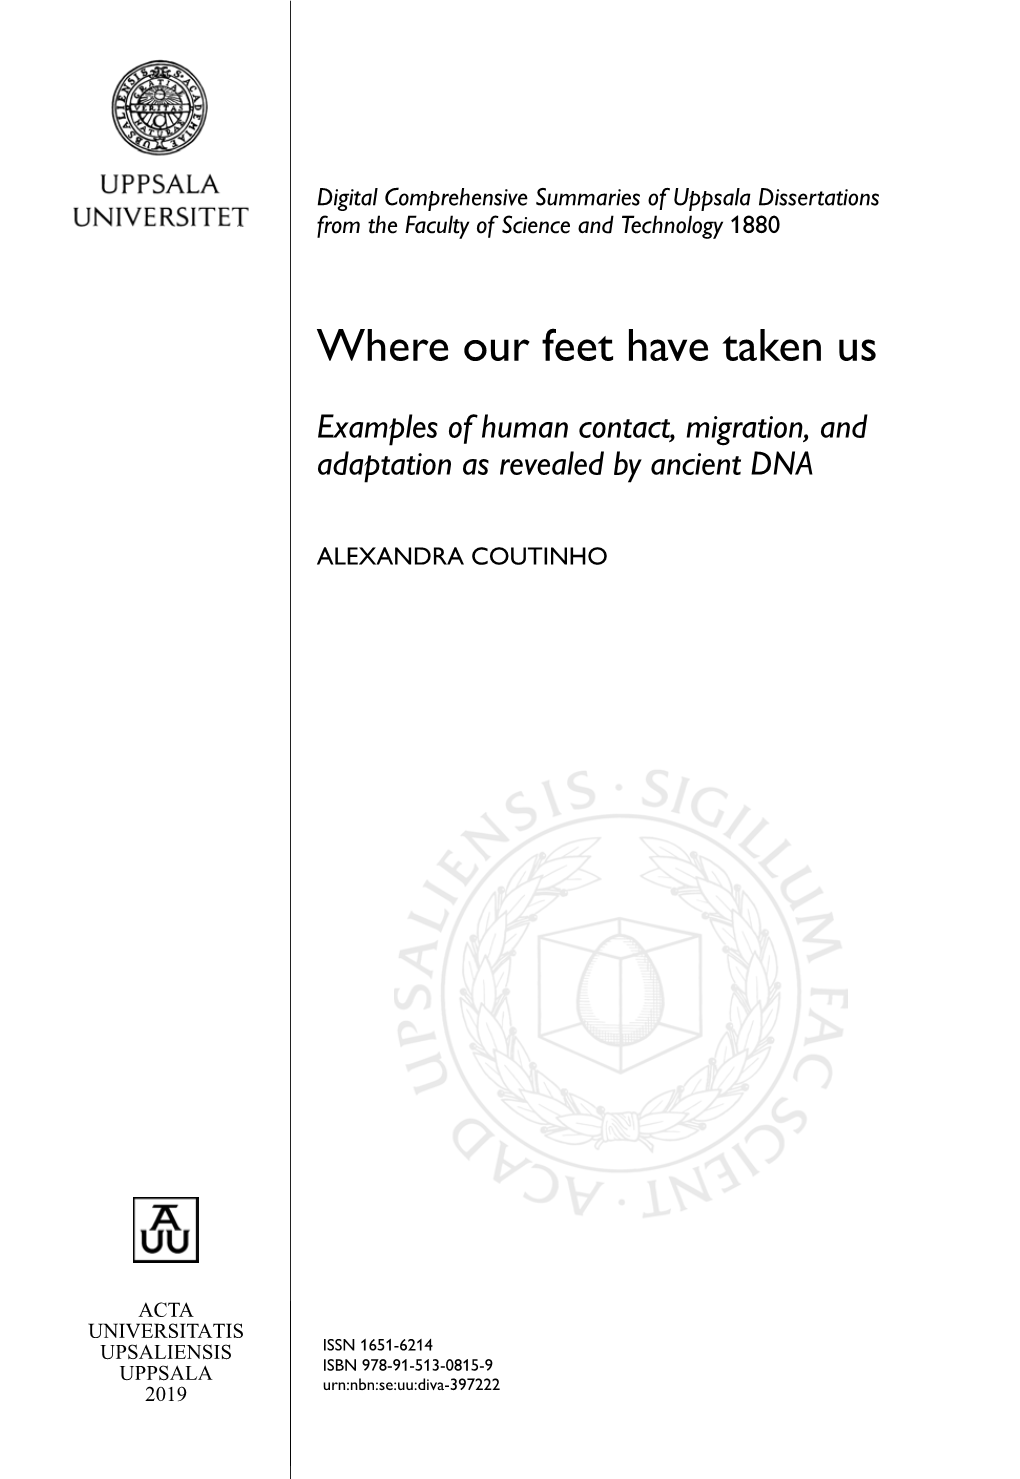 Where Our Feet Have Taken Us